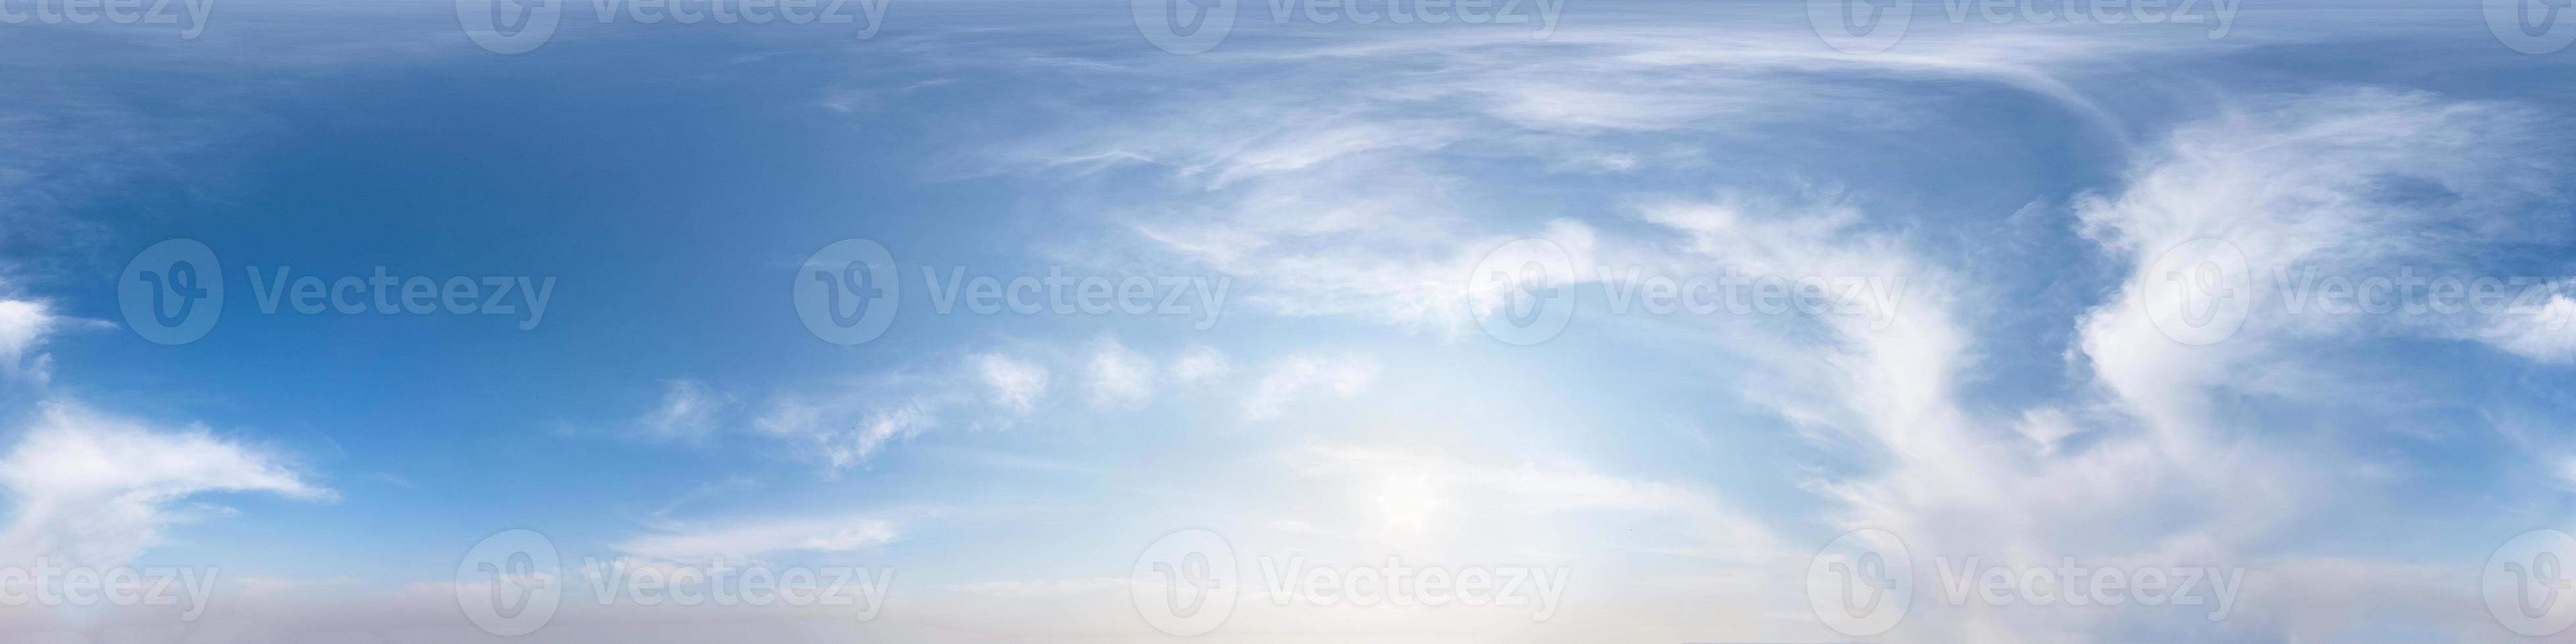 Seamless hdri panorama 360 degrees angle view blue sky with beautiful fluffy cumulus clouds with zenith for use in 3d graphics or game development as sky dome or edit drone shot photo